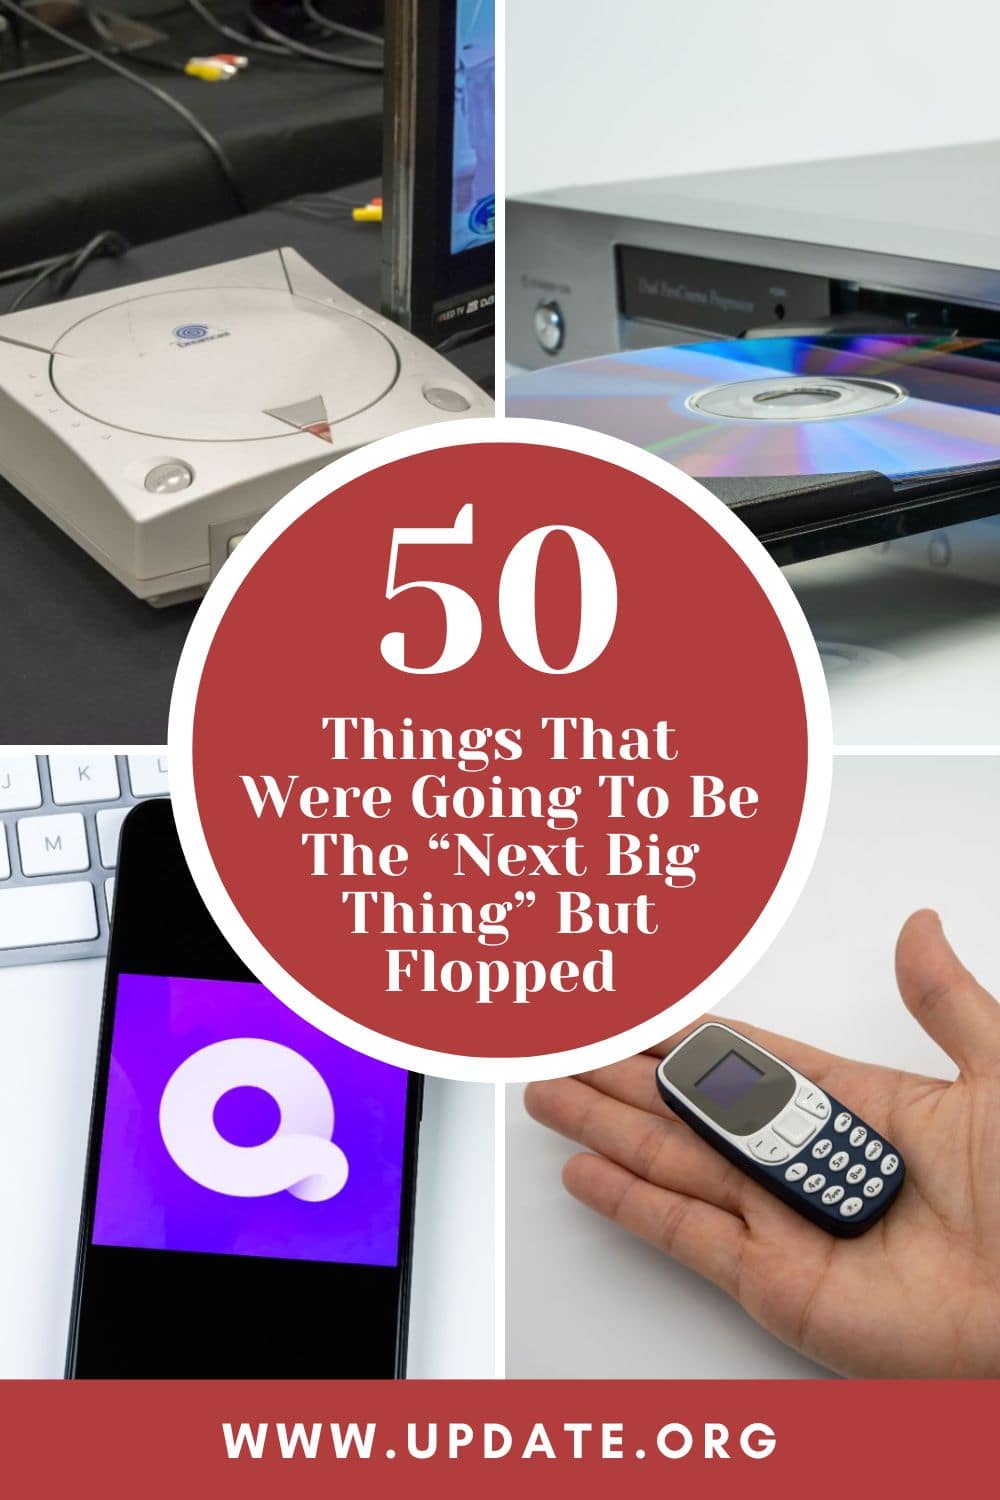 50 Things That Were Going To Be The “Next Big Thing” But Flopped pinterest image.